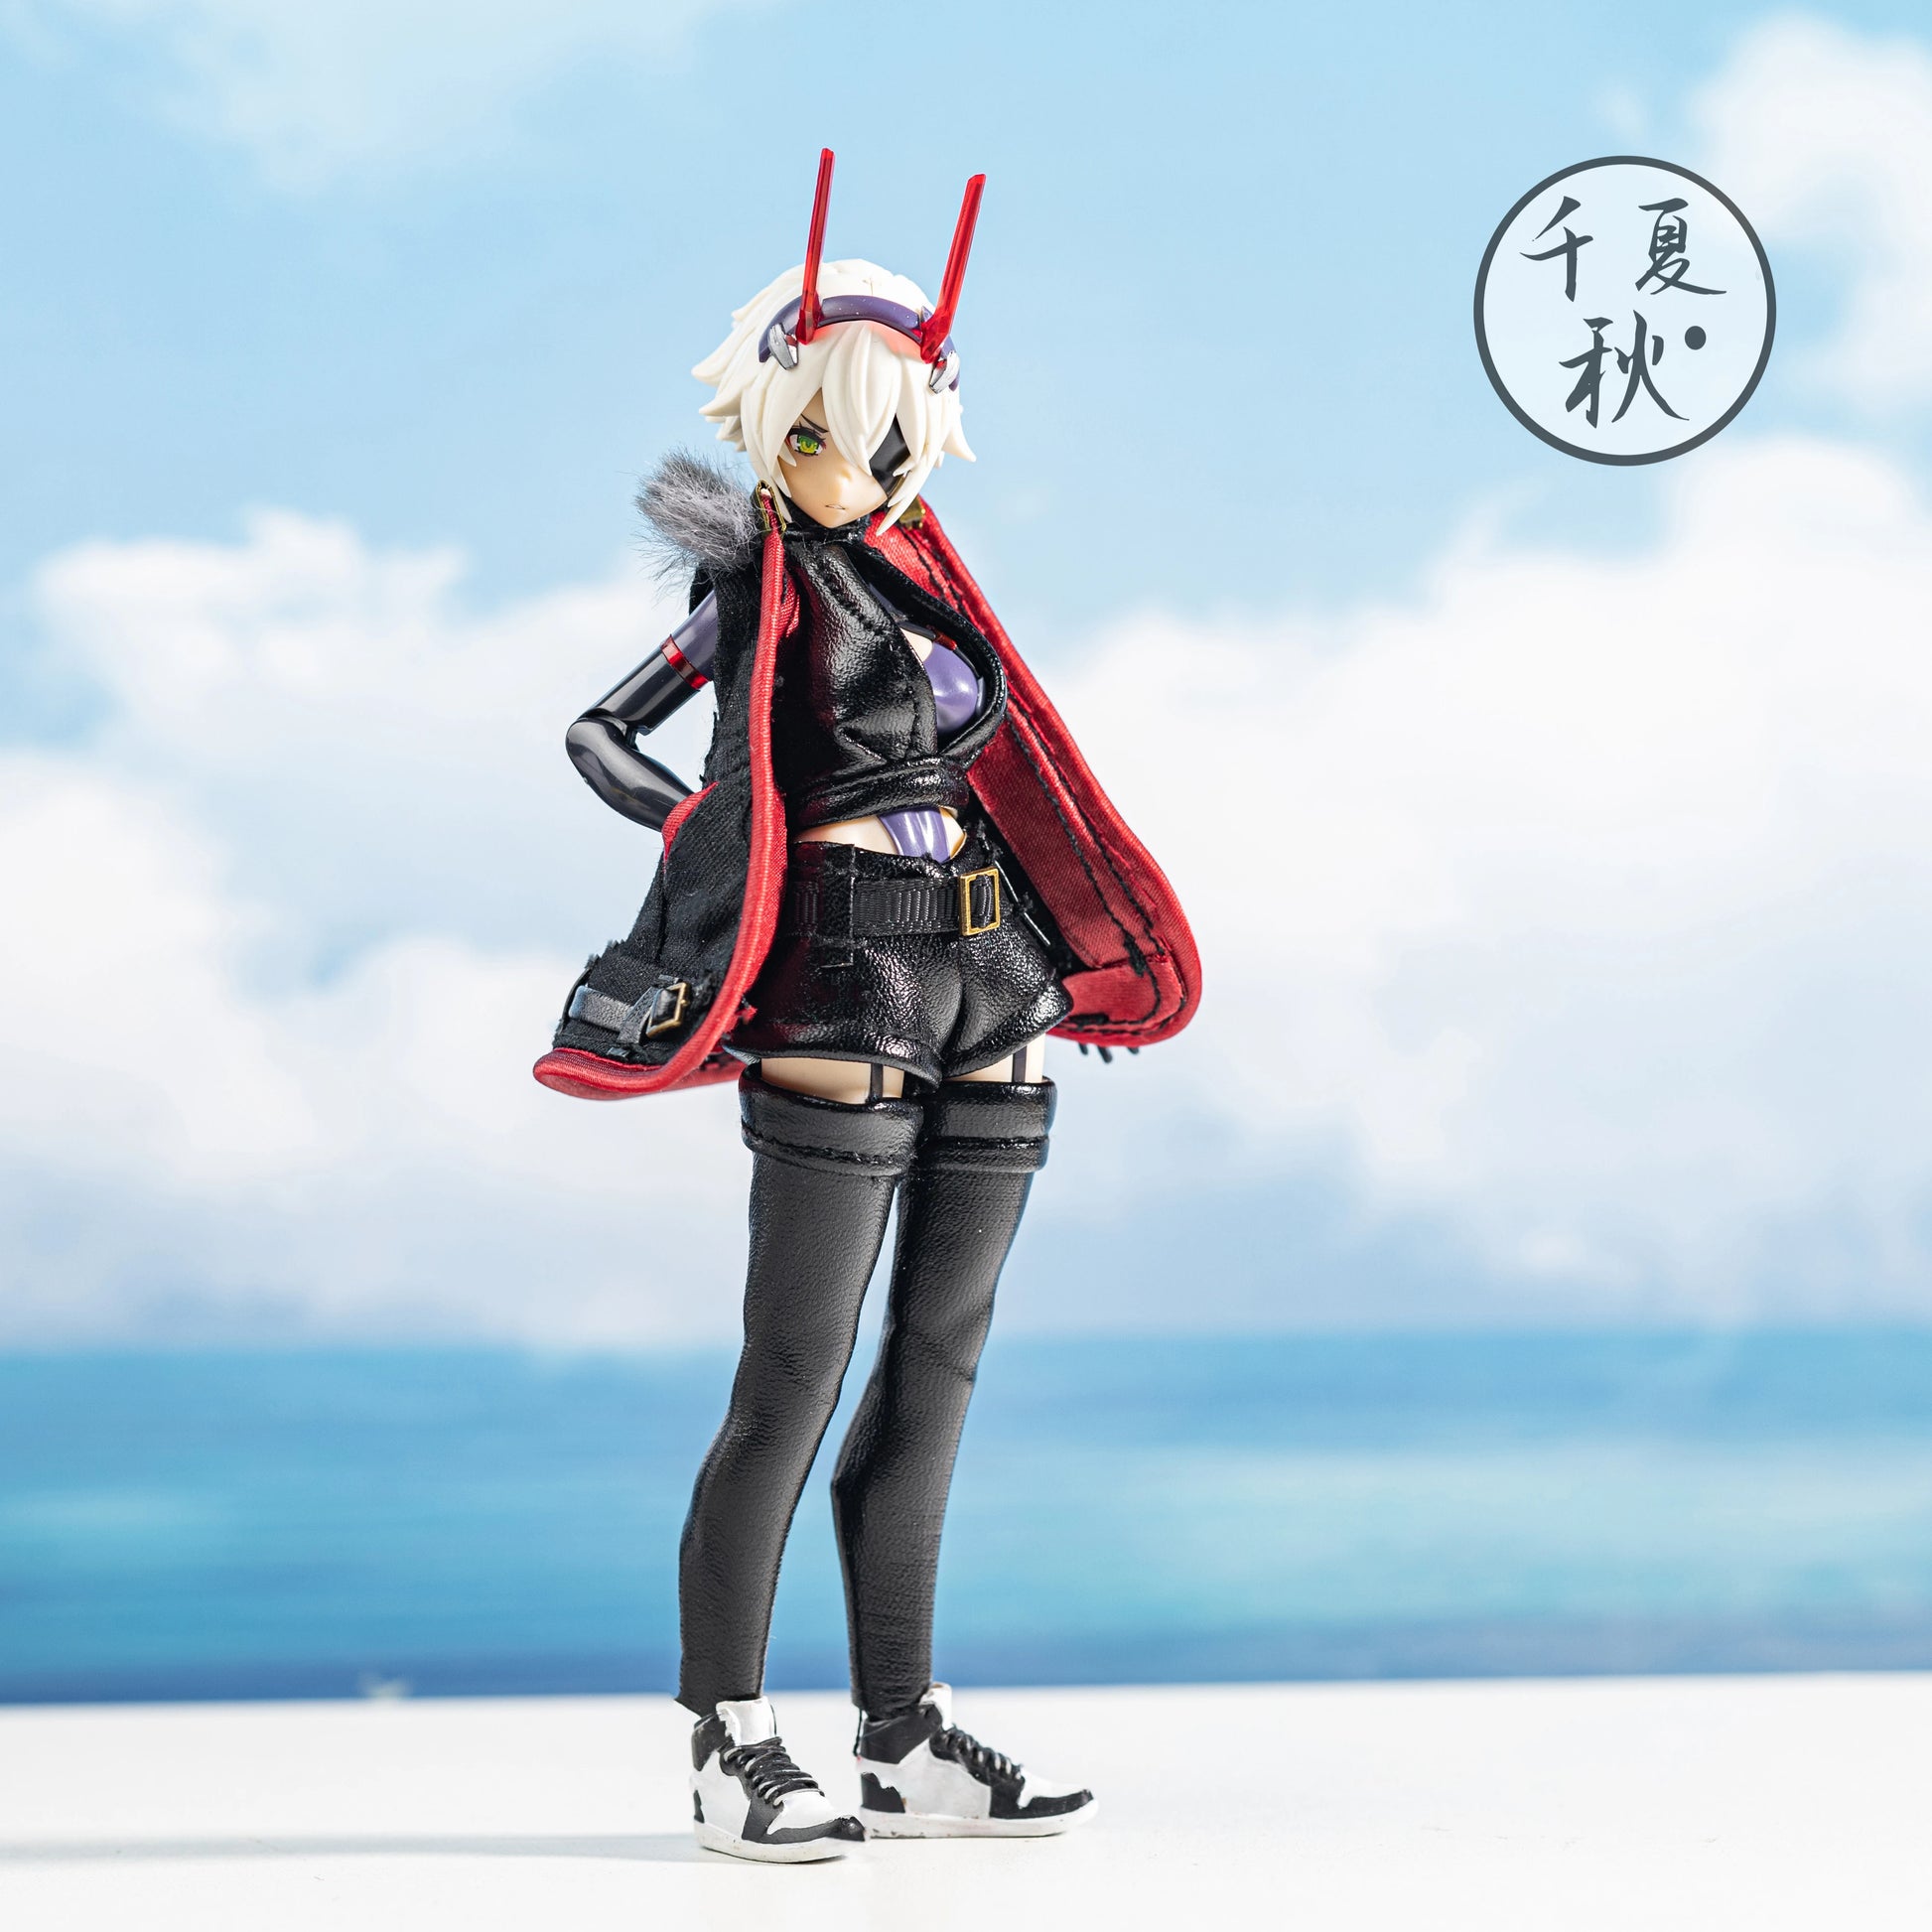 1/12 Scale Anime Girl Clothing Accessory Set For 6" Action Figure